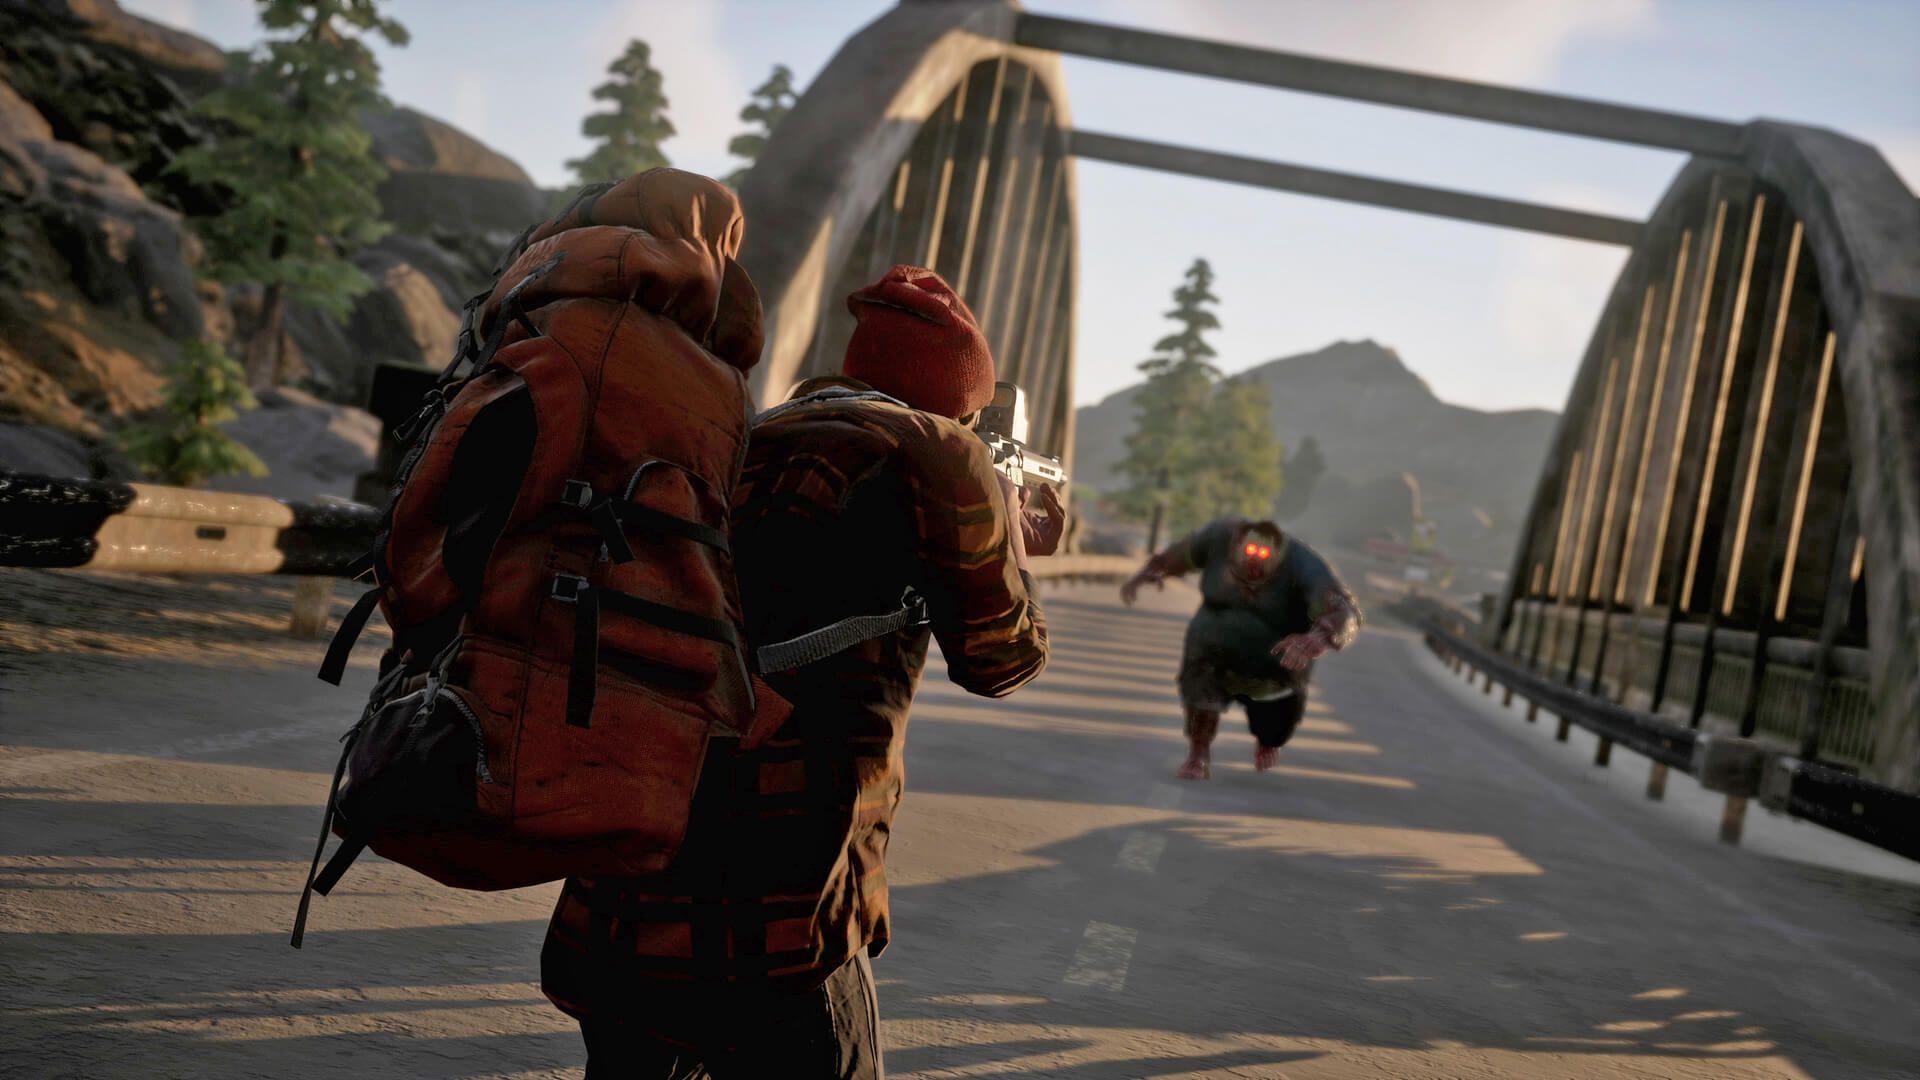 State of Decay 2 System Requirements, Game Details and Screenshots